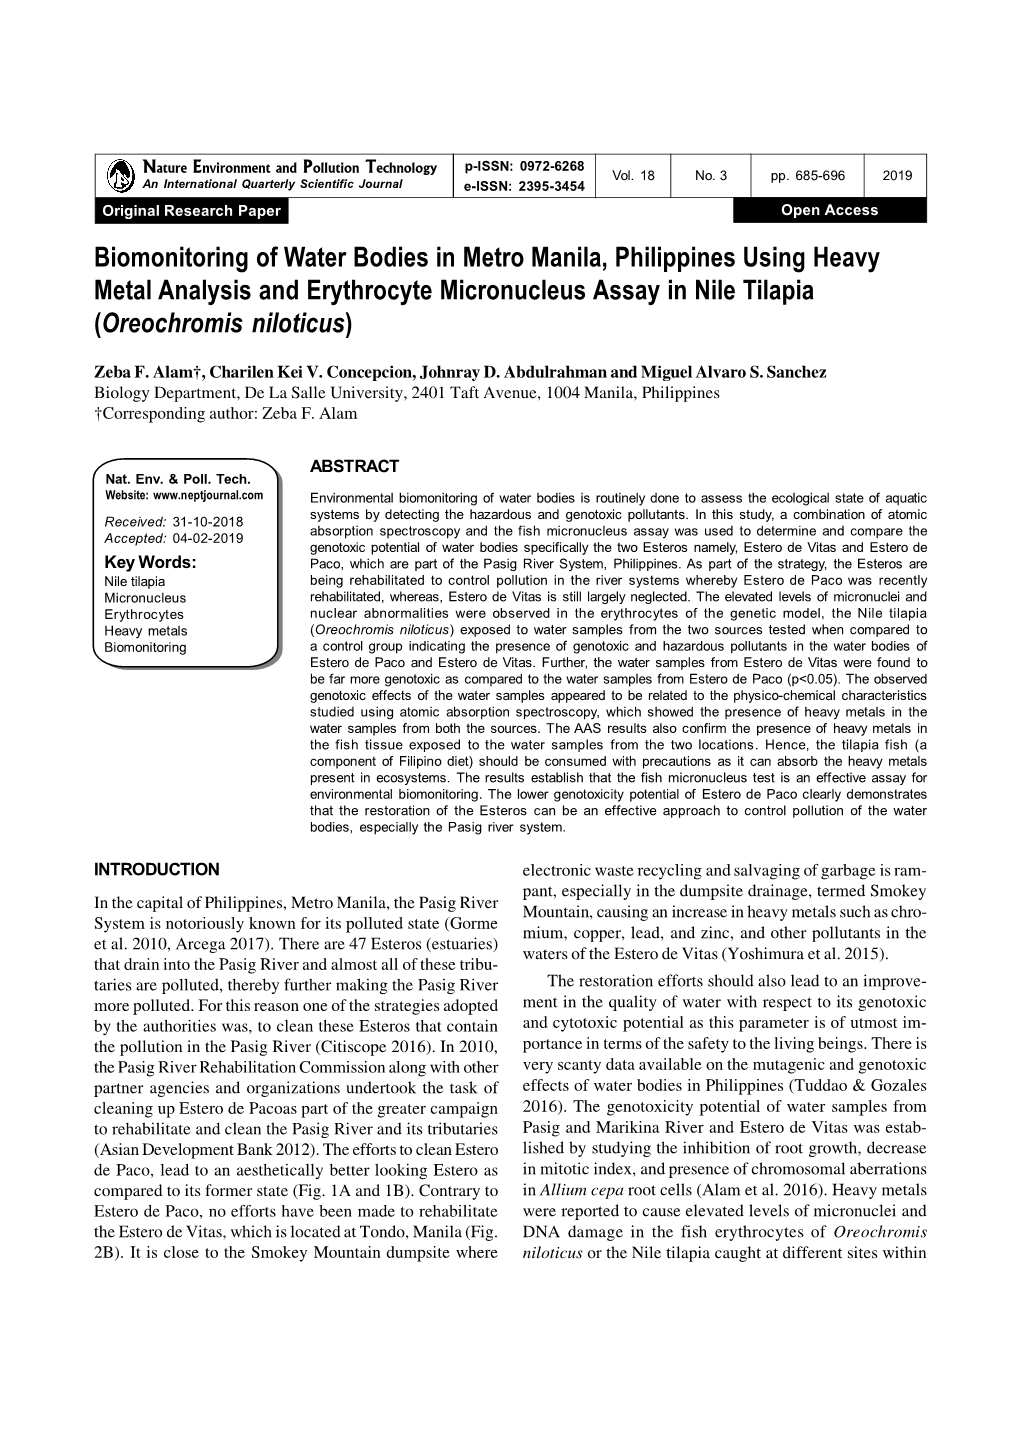 Biomonitoring of Water Bodies in Metro Manila, Philippines Using Heavy Metal Analysis and Erythrocyte Micronucleus Assay in Nile Tilapia (Oreochromis Niloticus)